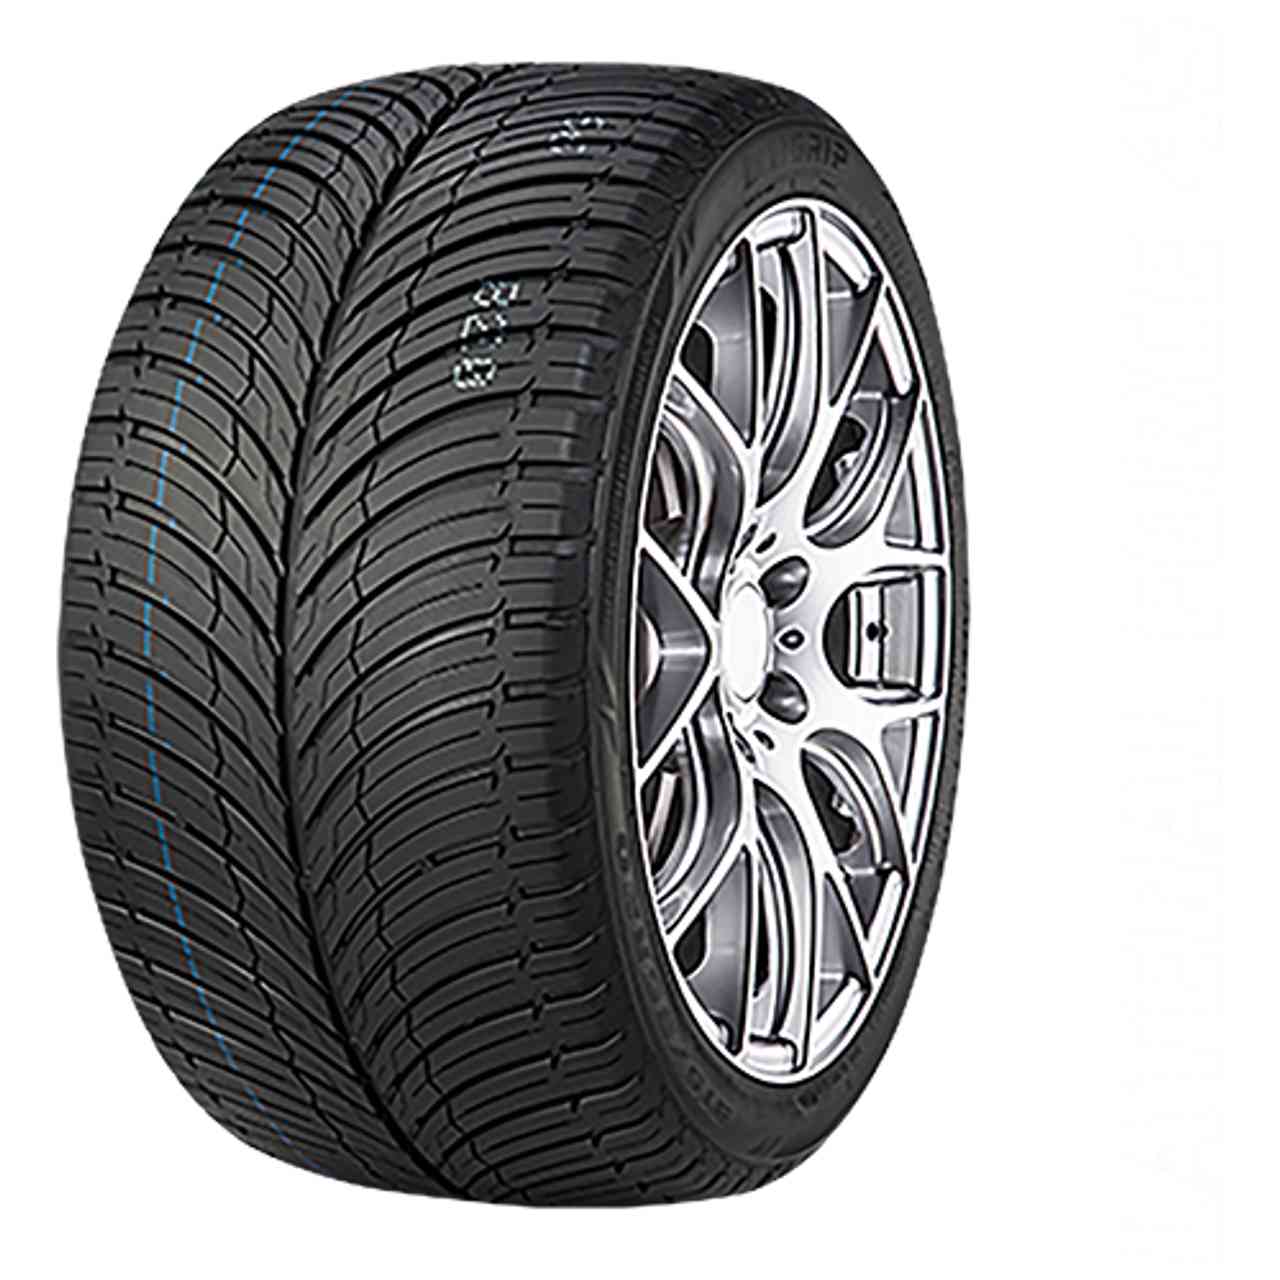 UNIGRIP LATERAL FORCE 4S 275/40R19 105W BSW